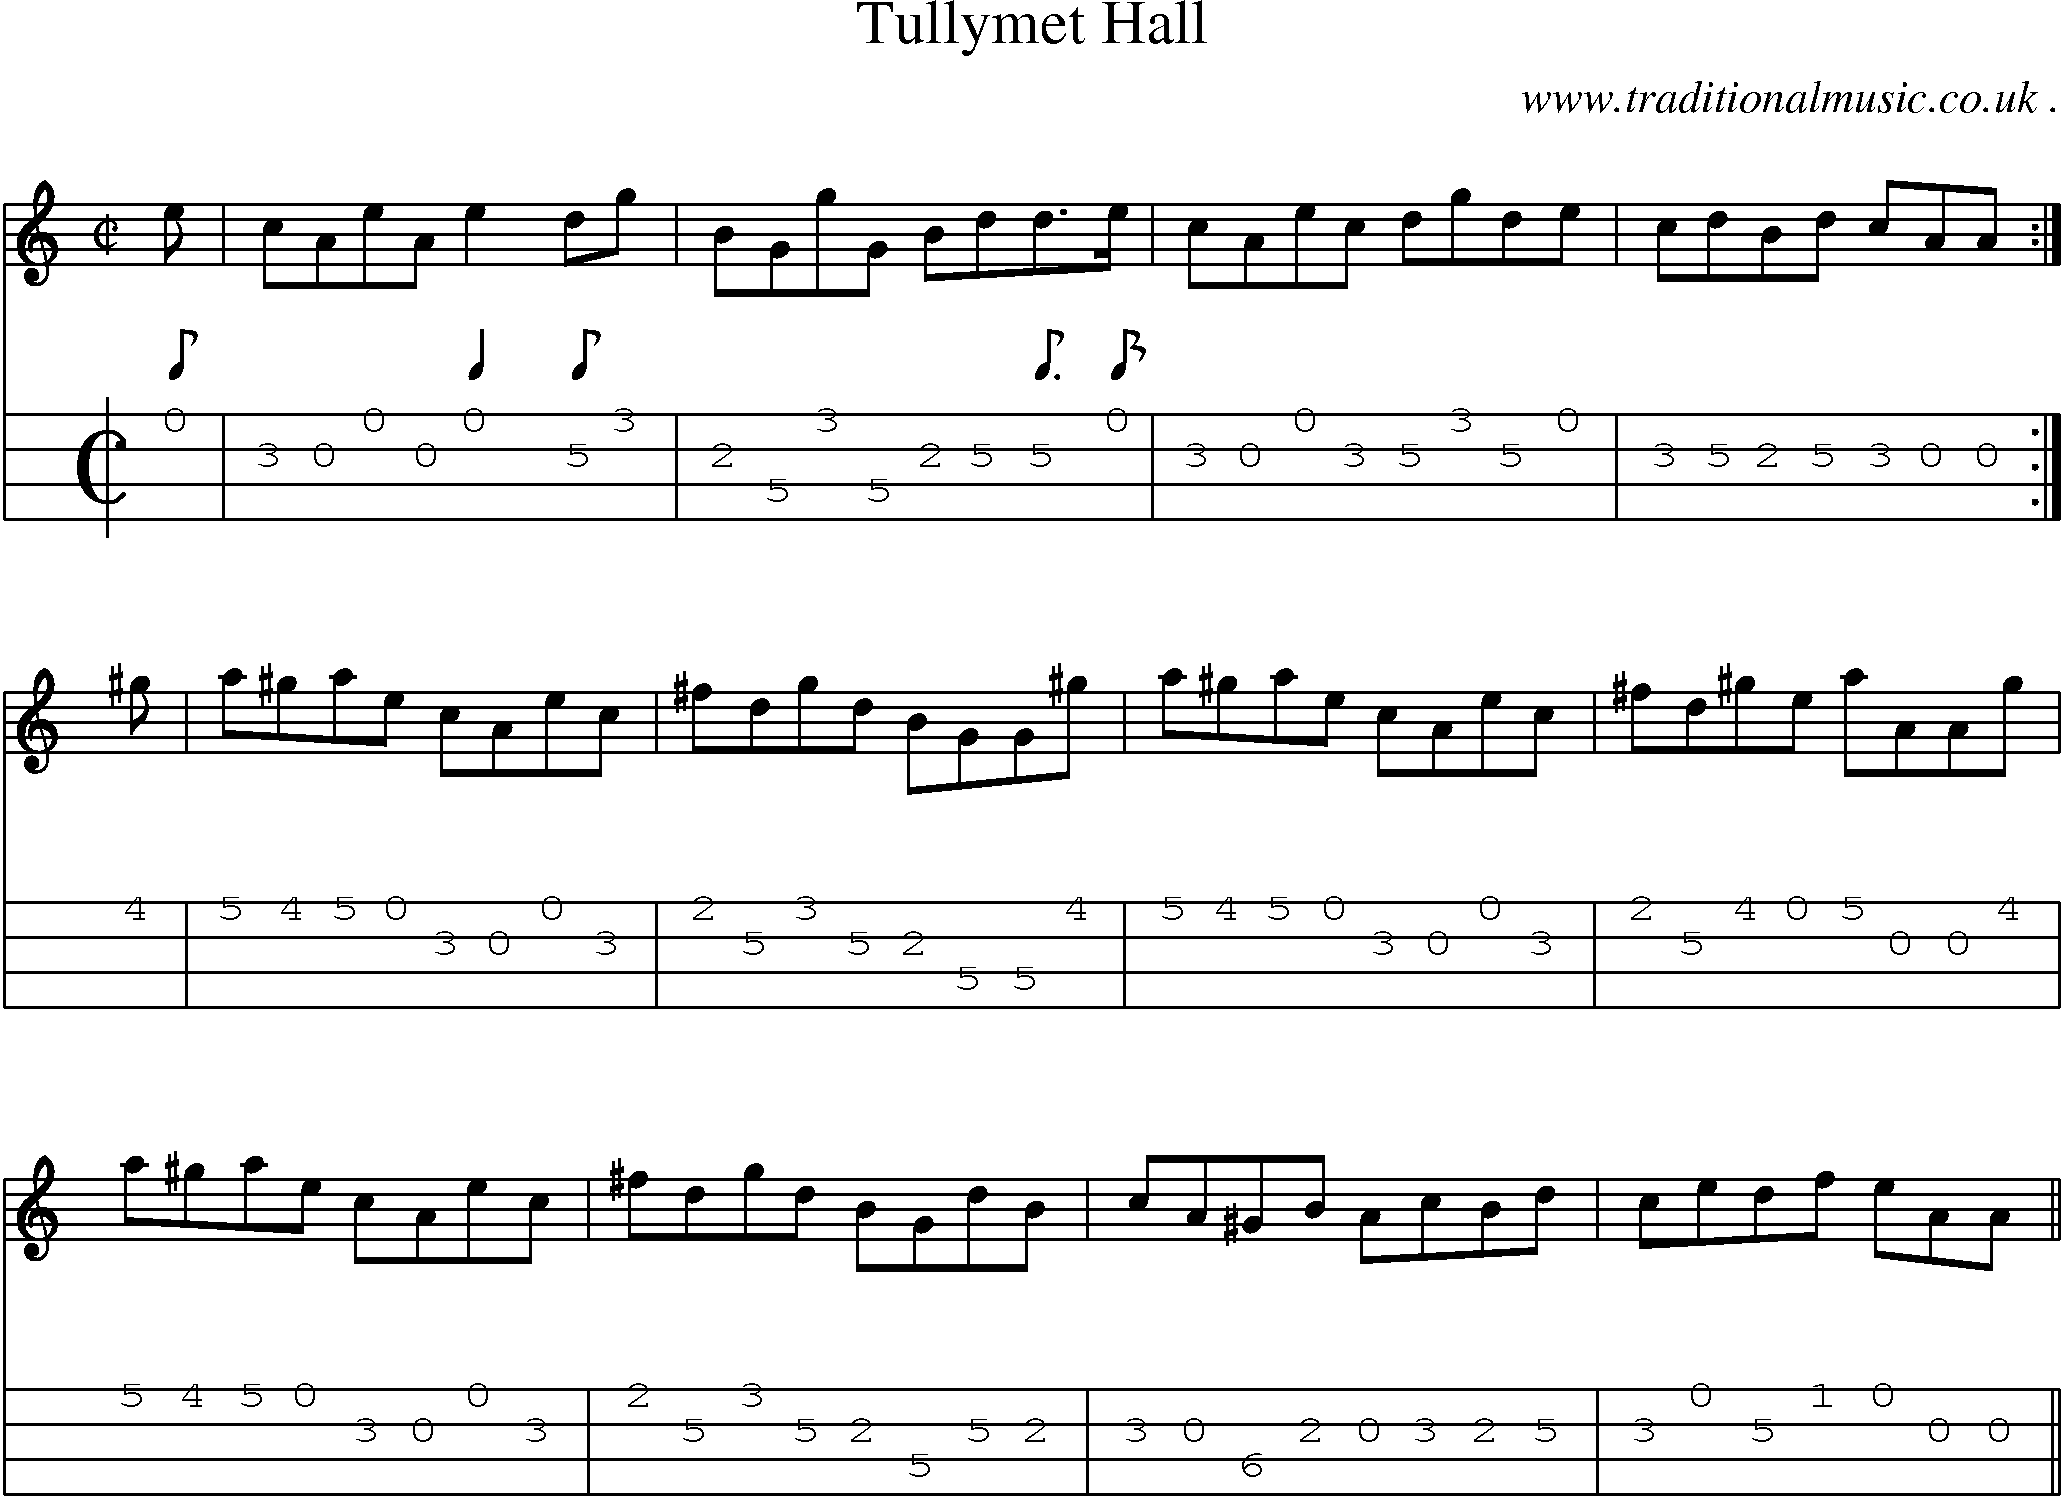 Sheet-music  score, Chords and Mandolin Tabs for Tullymet Hall